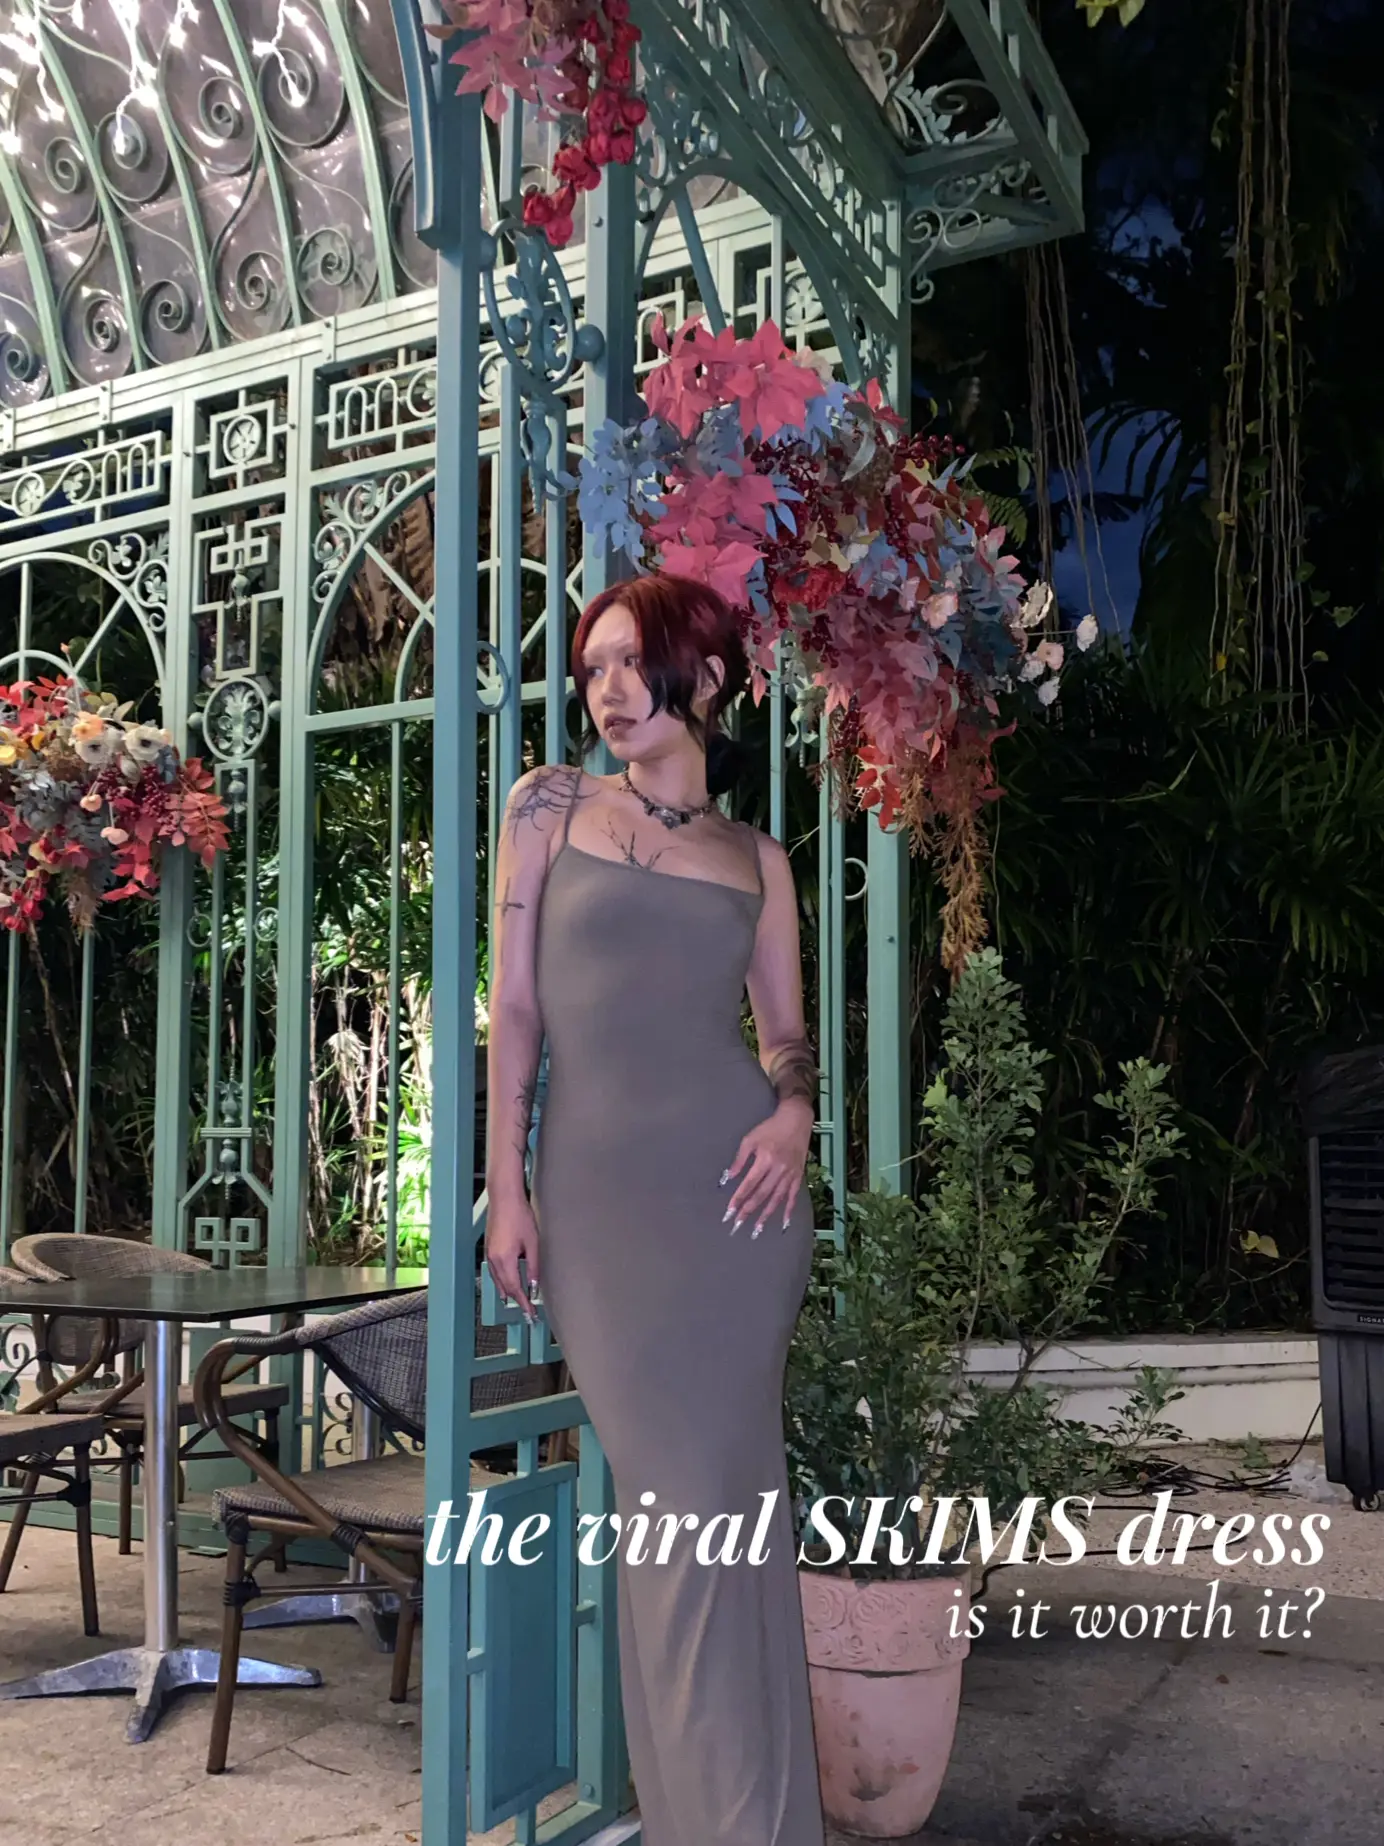 the VIRAL SKIMS DRESS is WORTH MY $125, Gallery posted by violet